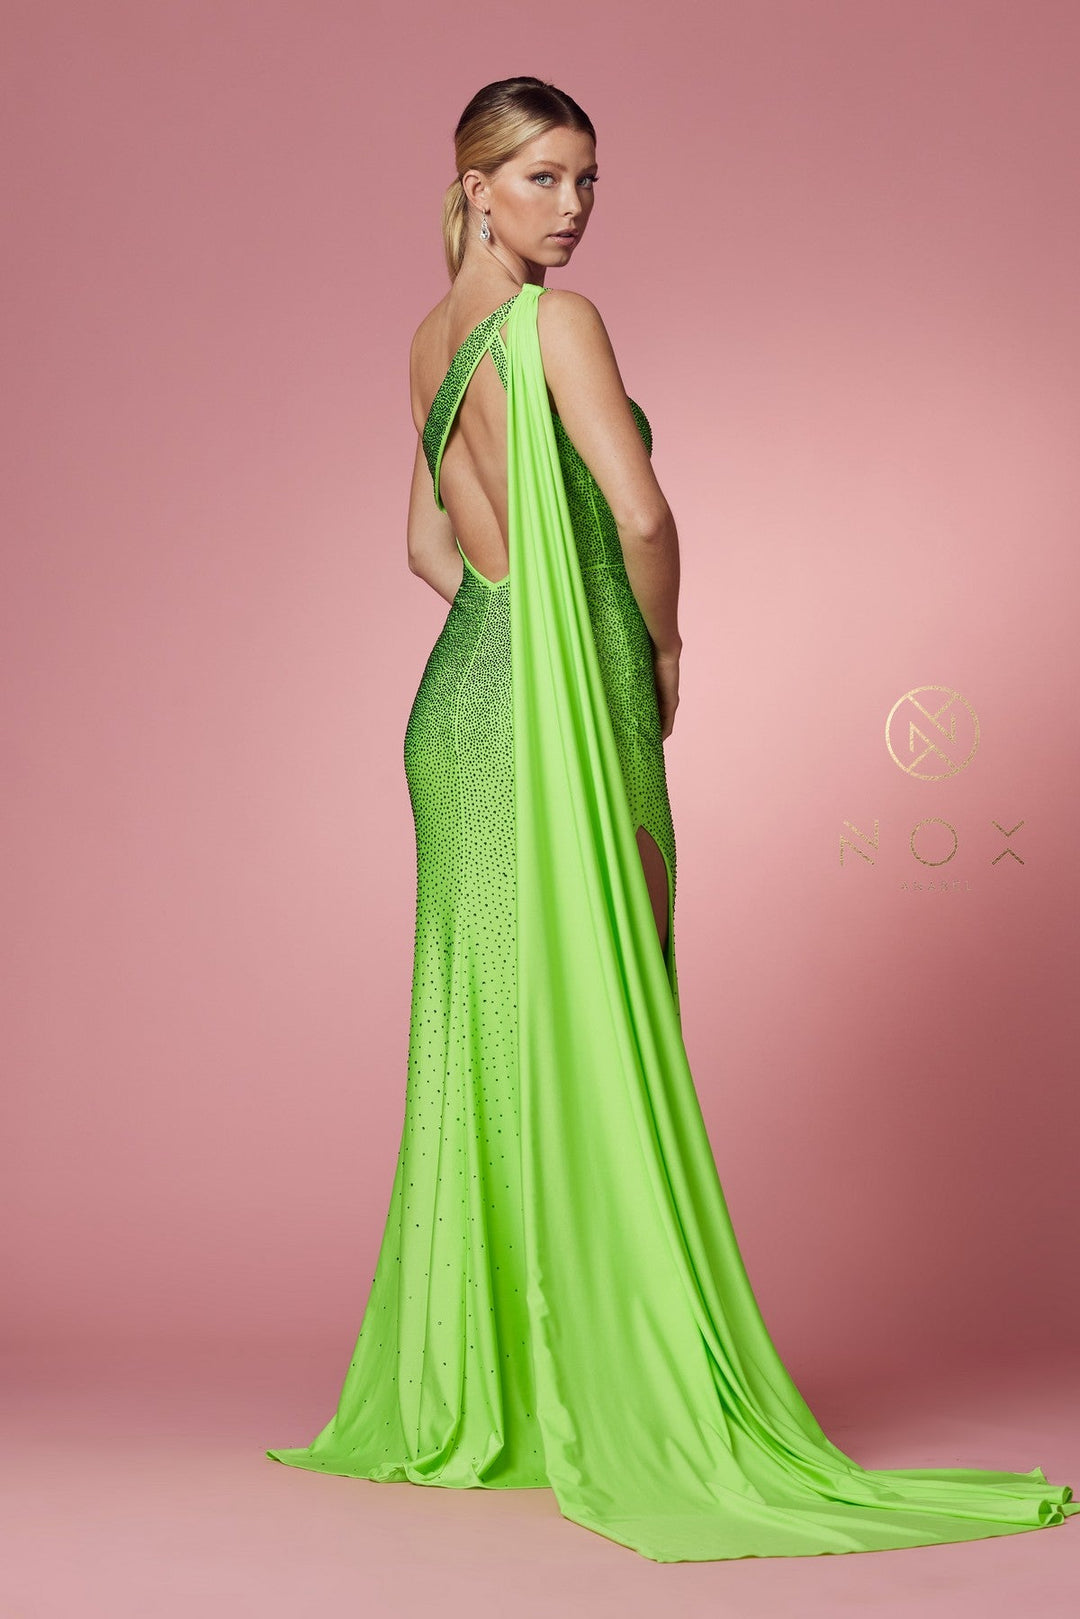 Fitted Long One Shoulder Dress by Nox Anabel E1039